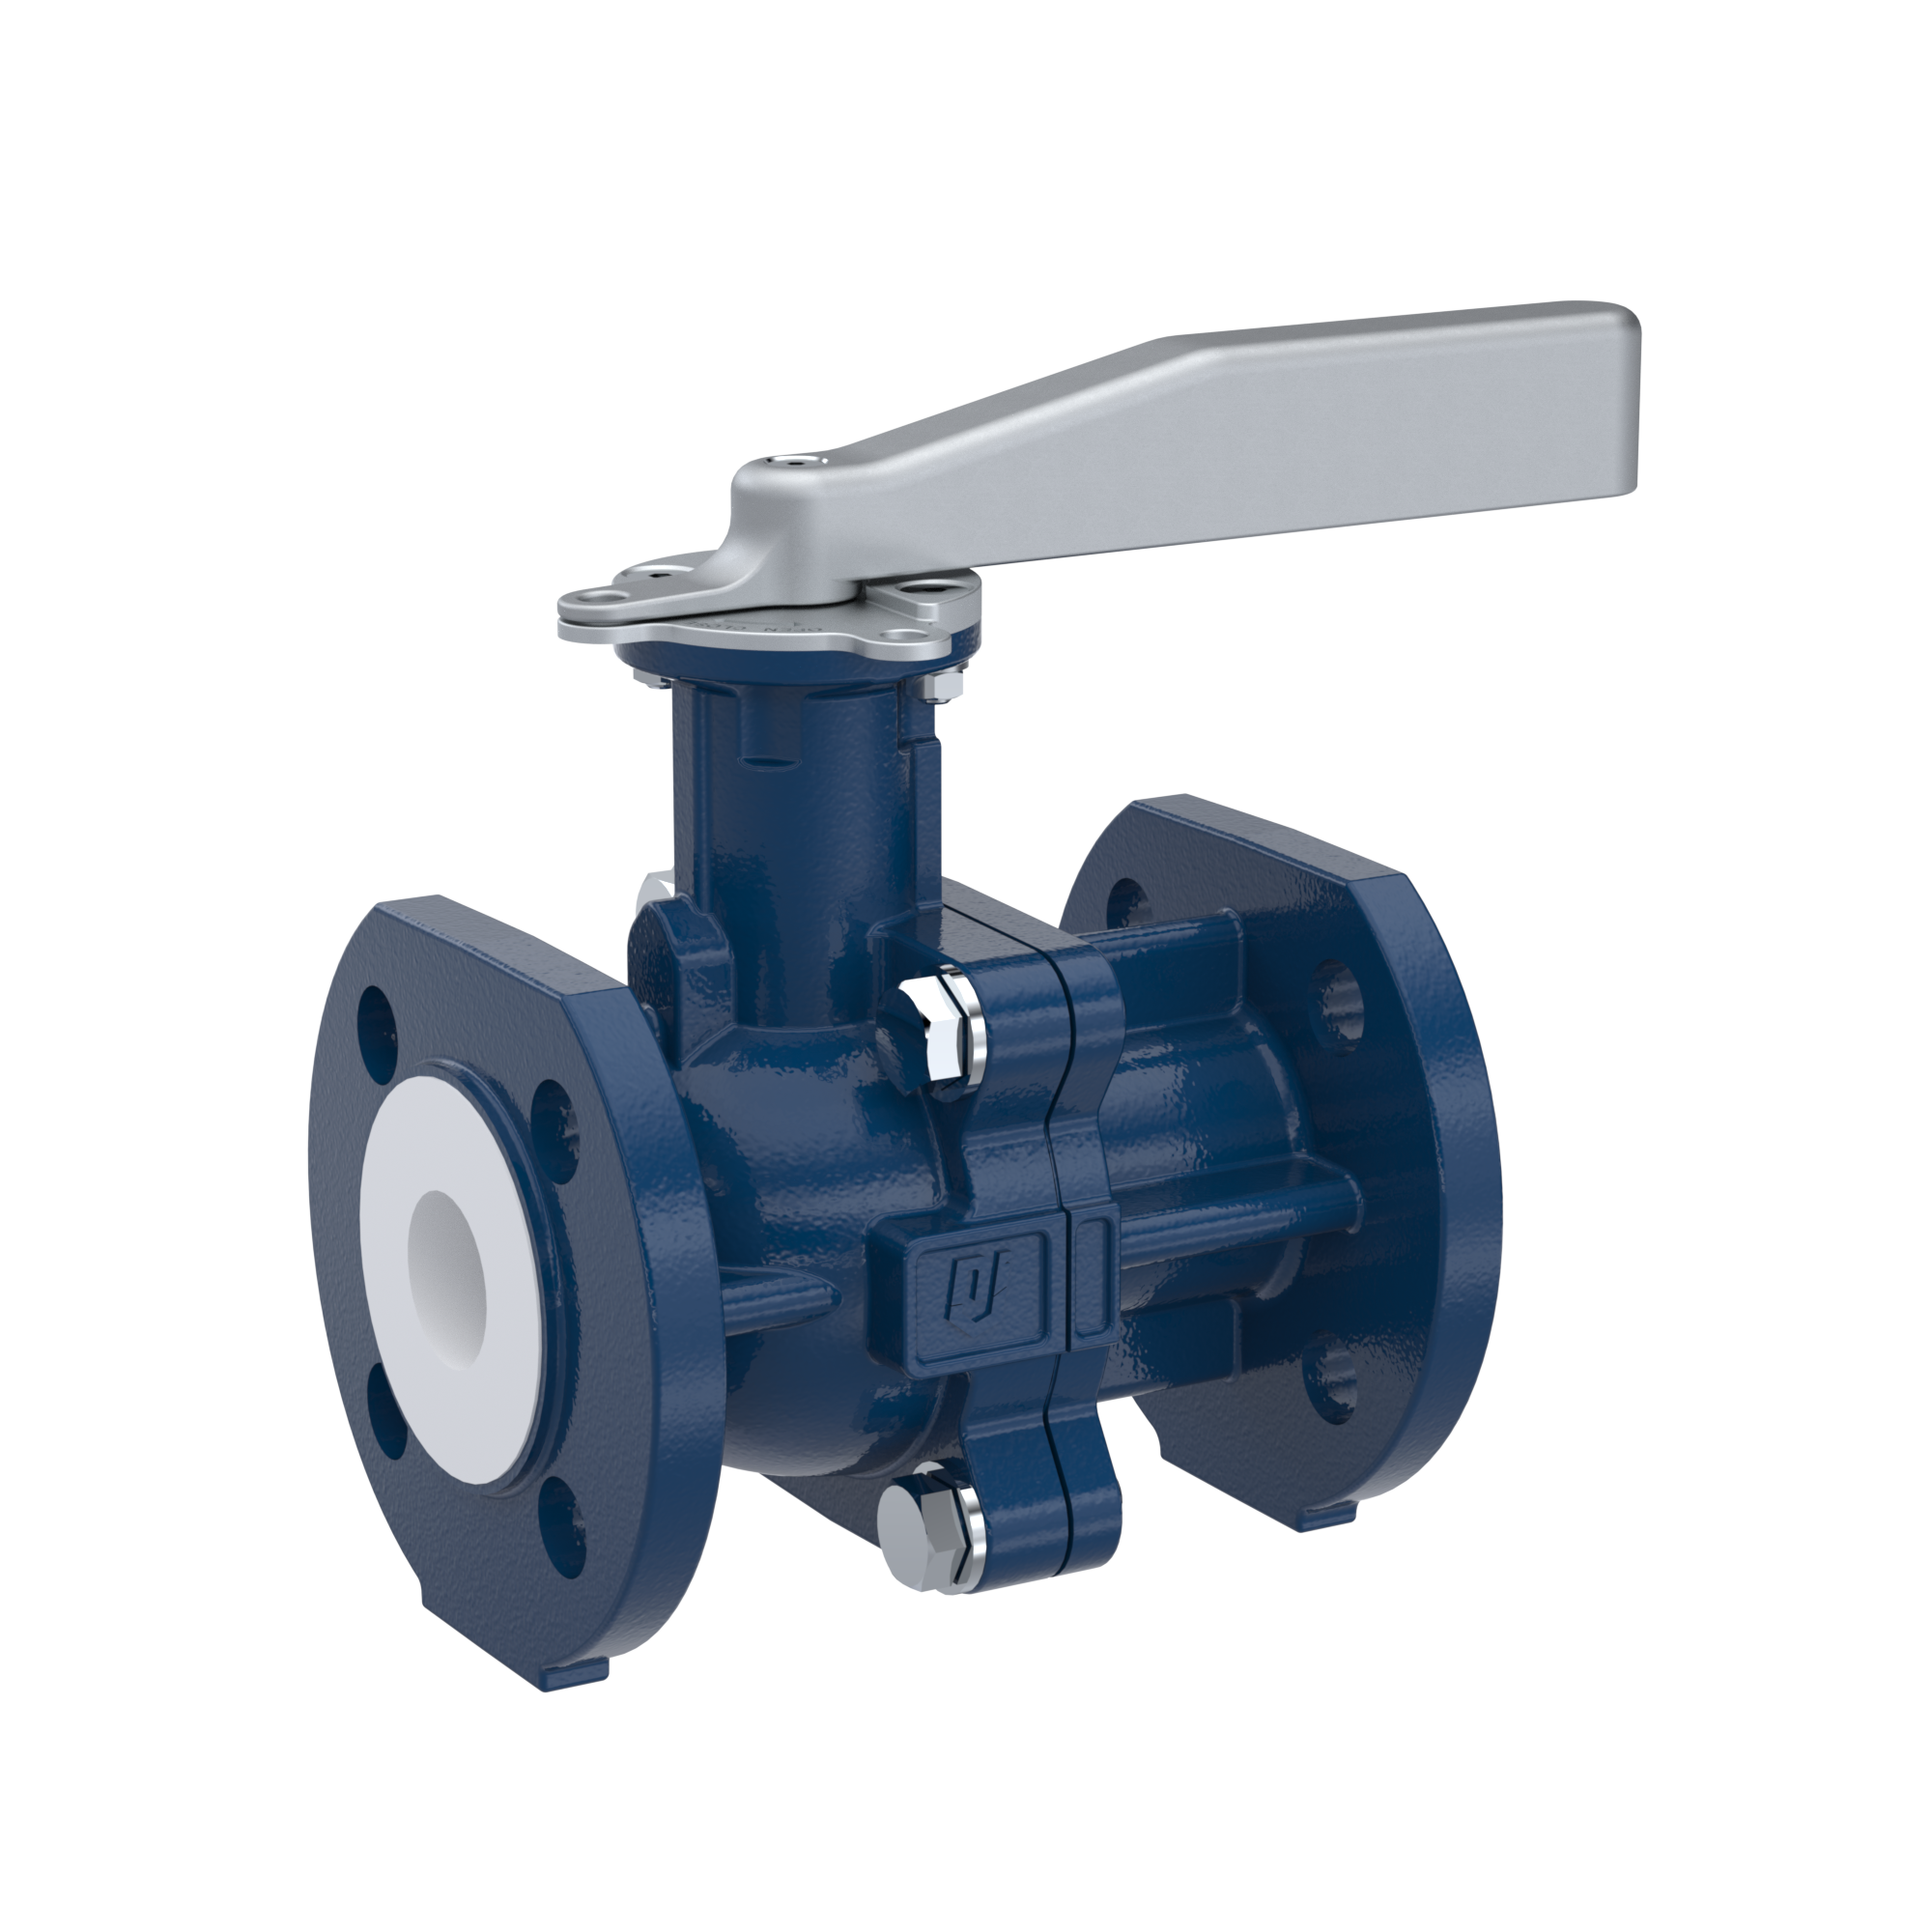 PFA-flange ball valve FK13 DN20 - 3/4" inch PN10/16 made of spheroidal graphite cast iron with lever hand